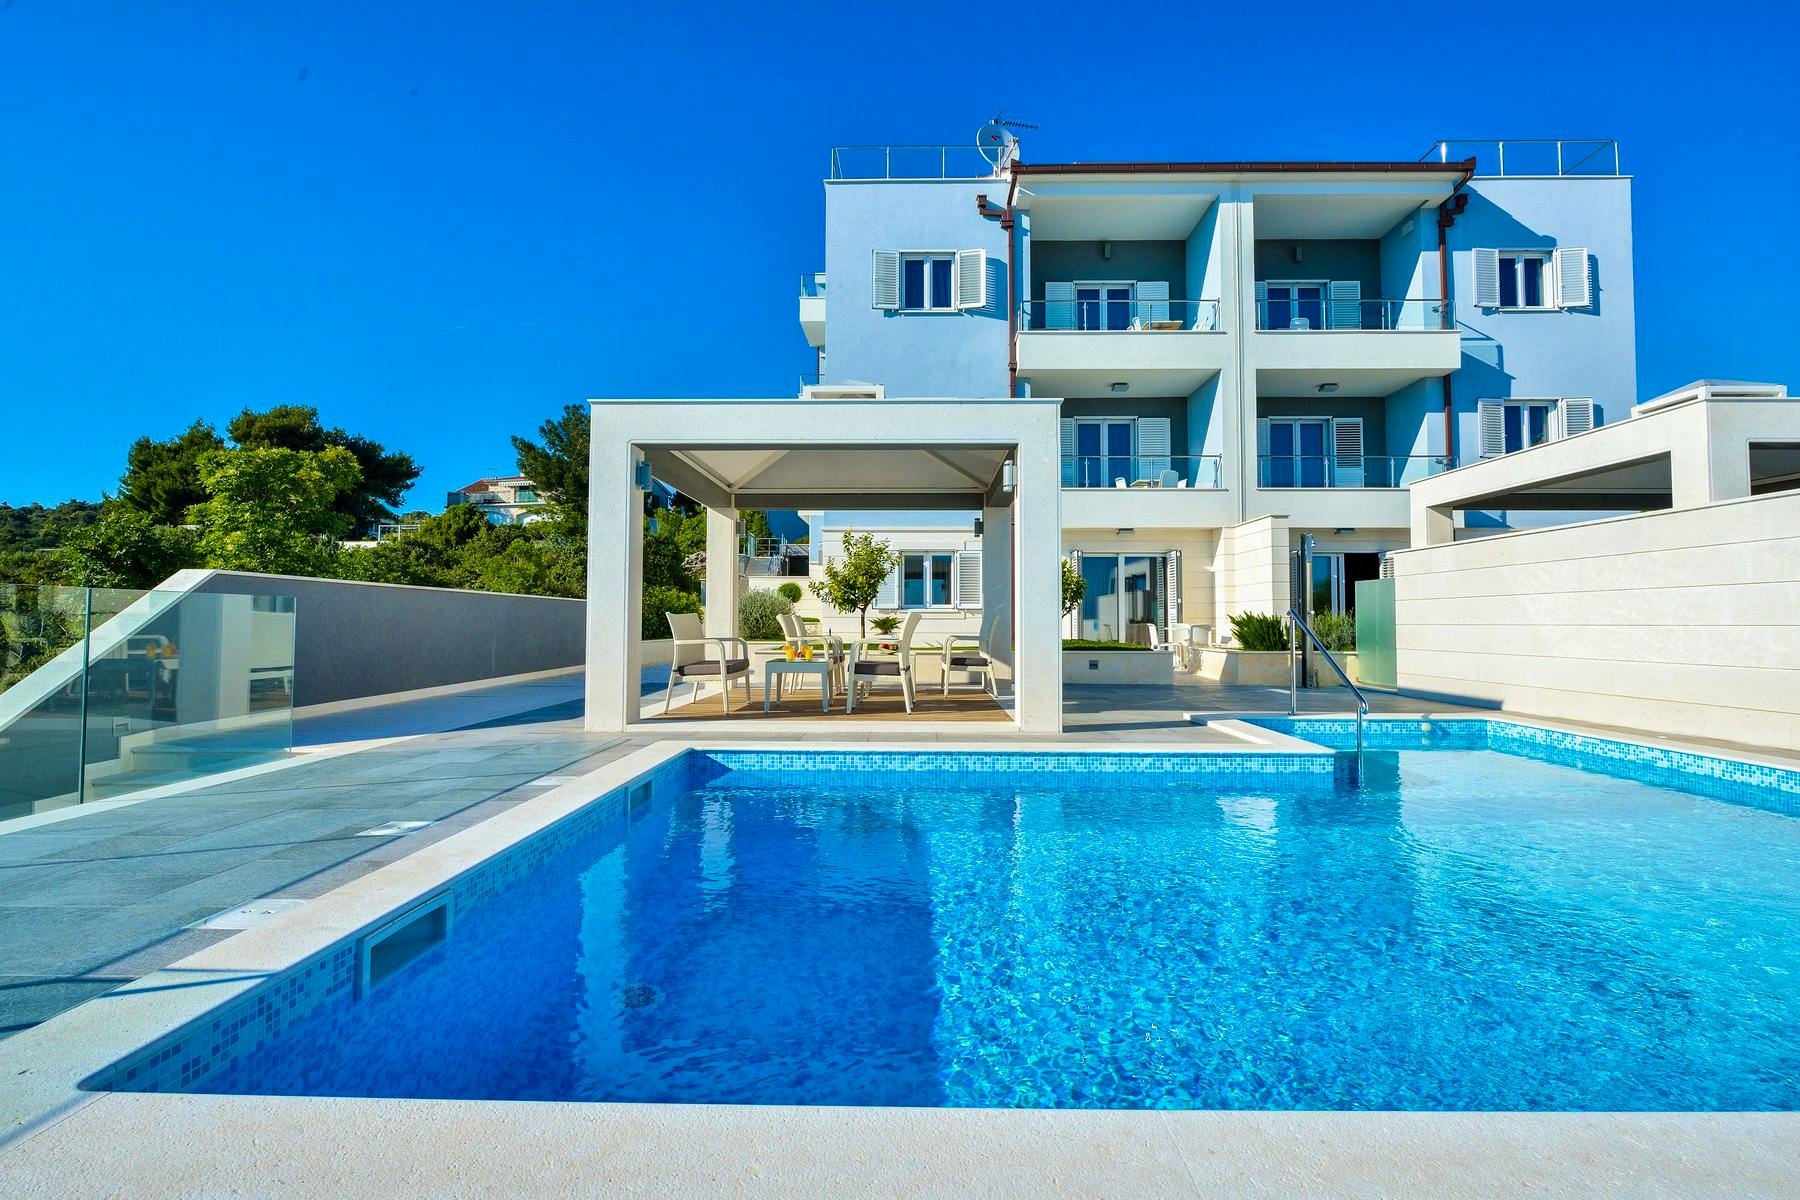 Newly built seafront property with pool